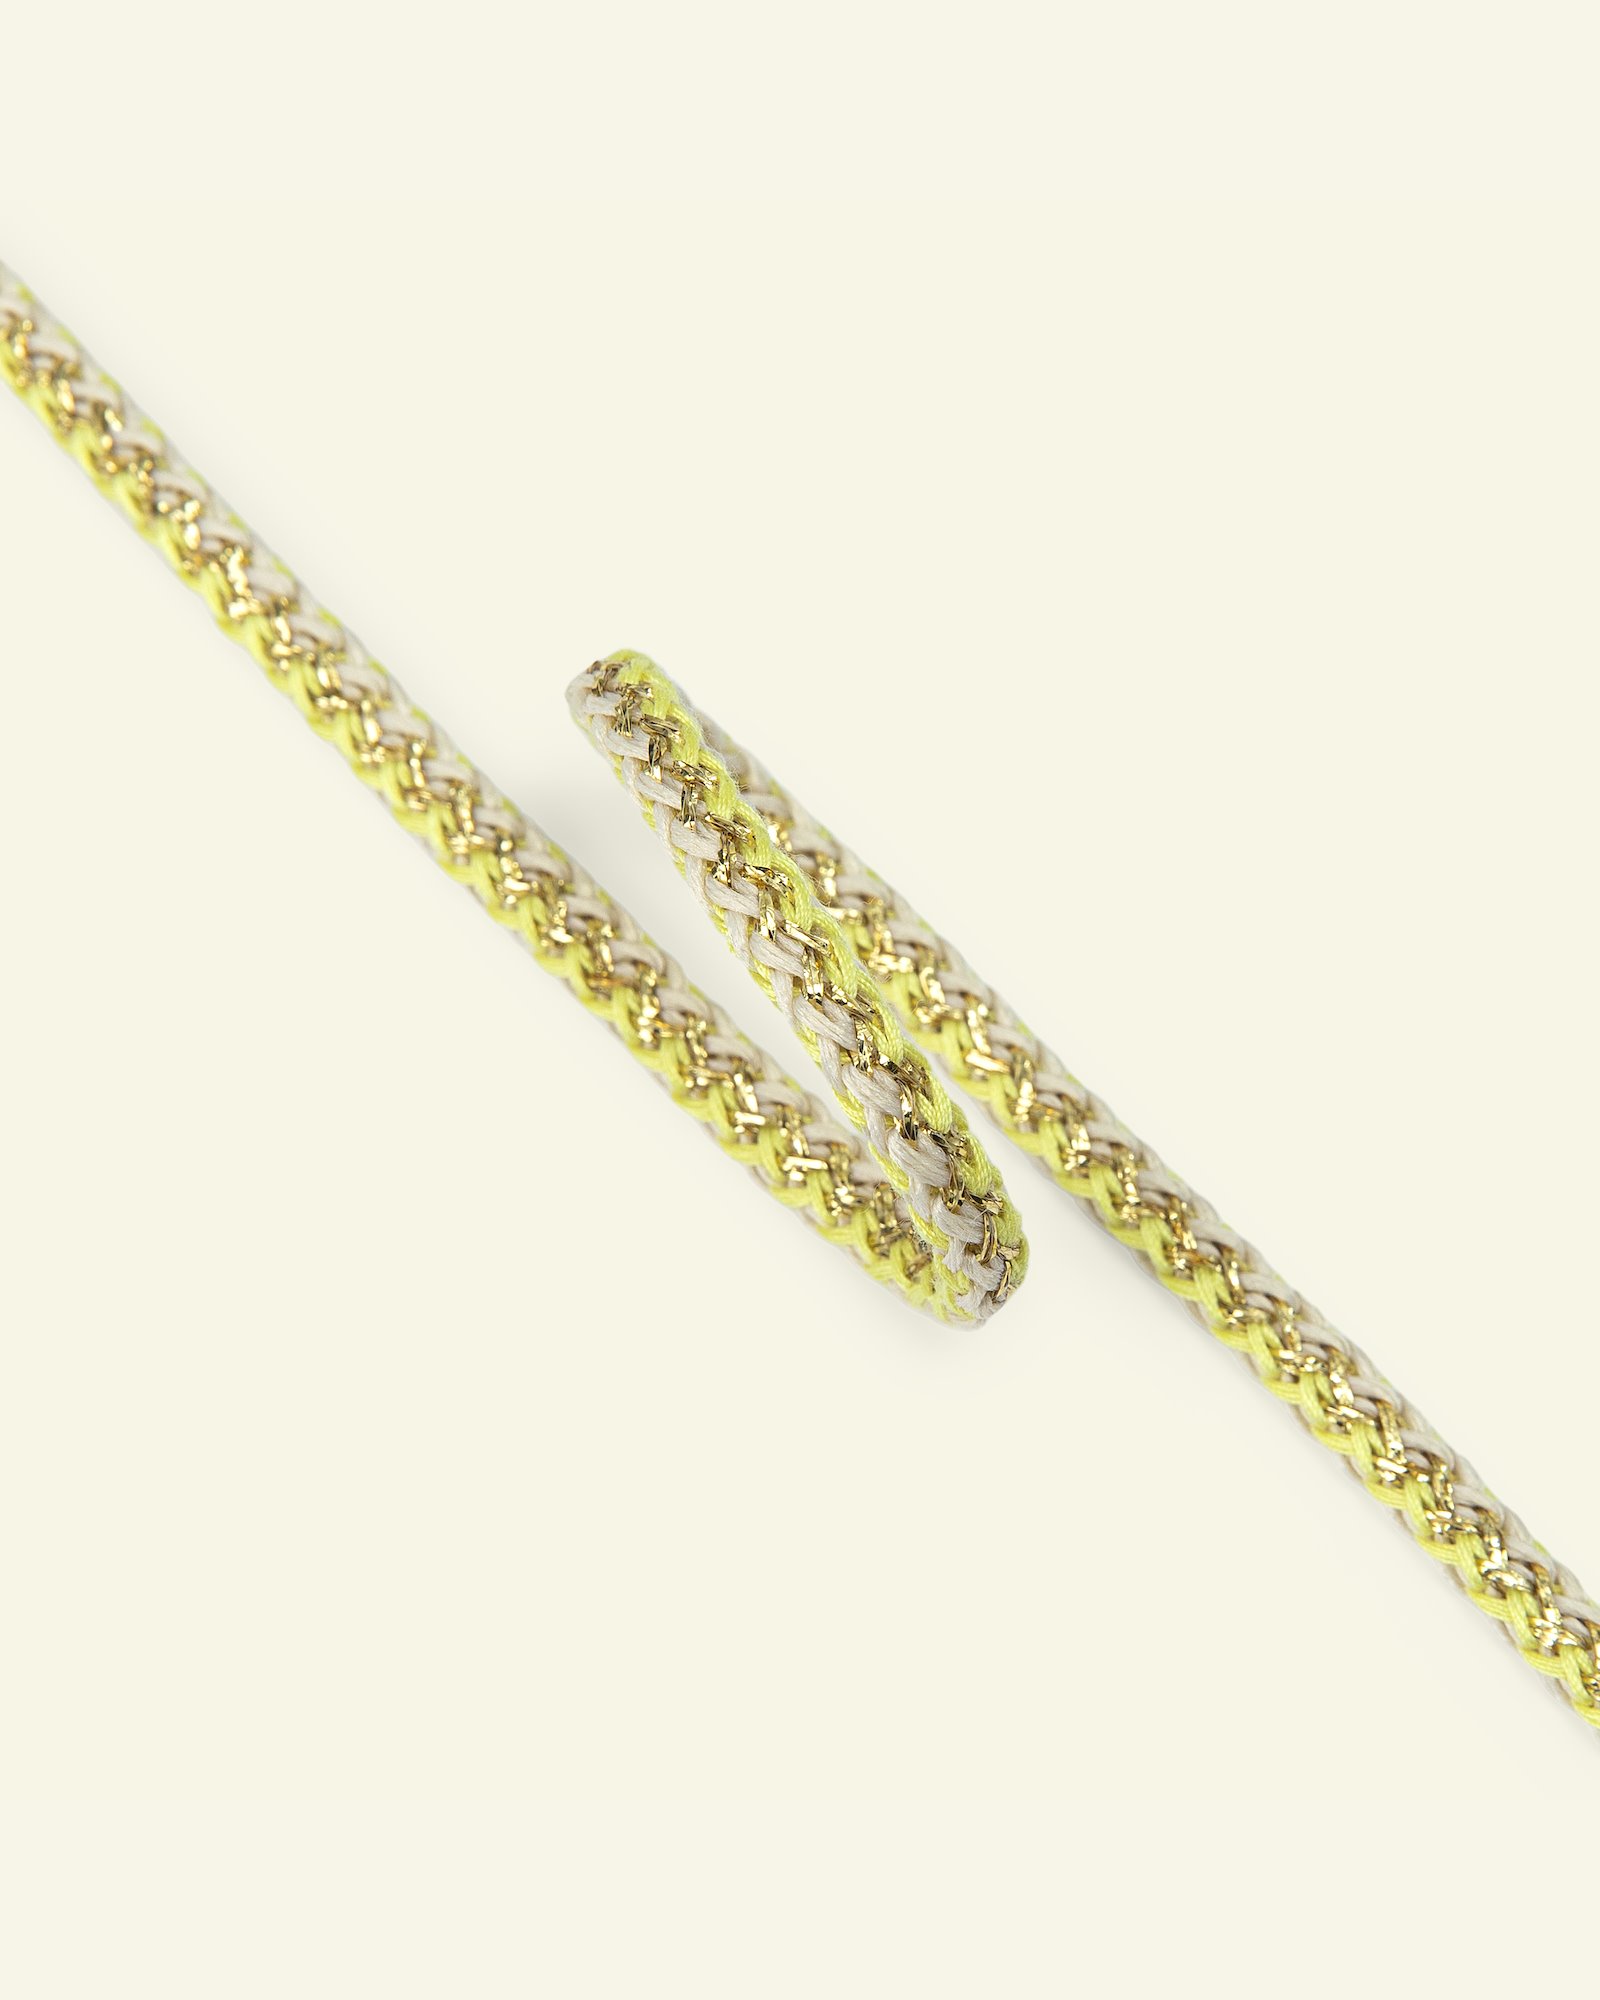 String 5mm yellow/offwhite/gold col. 2m 22428_pack